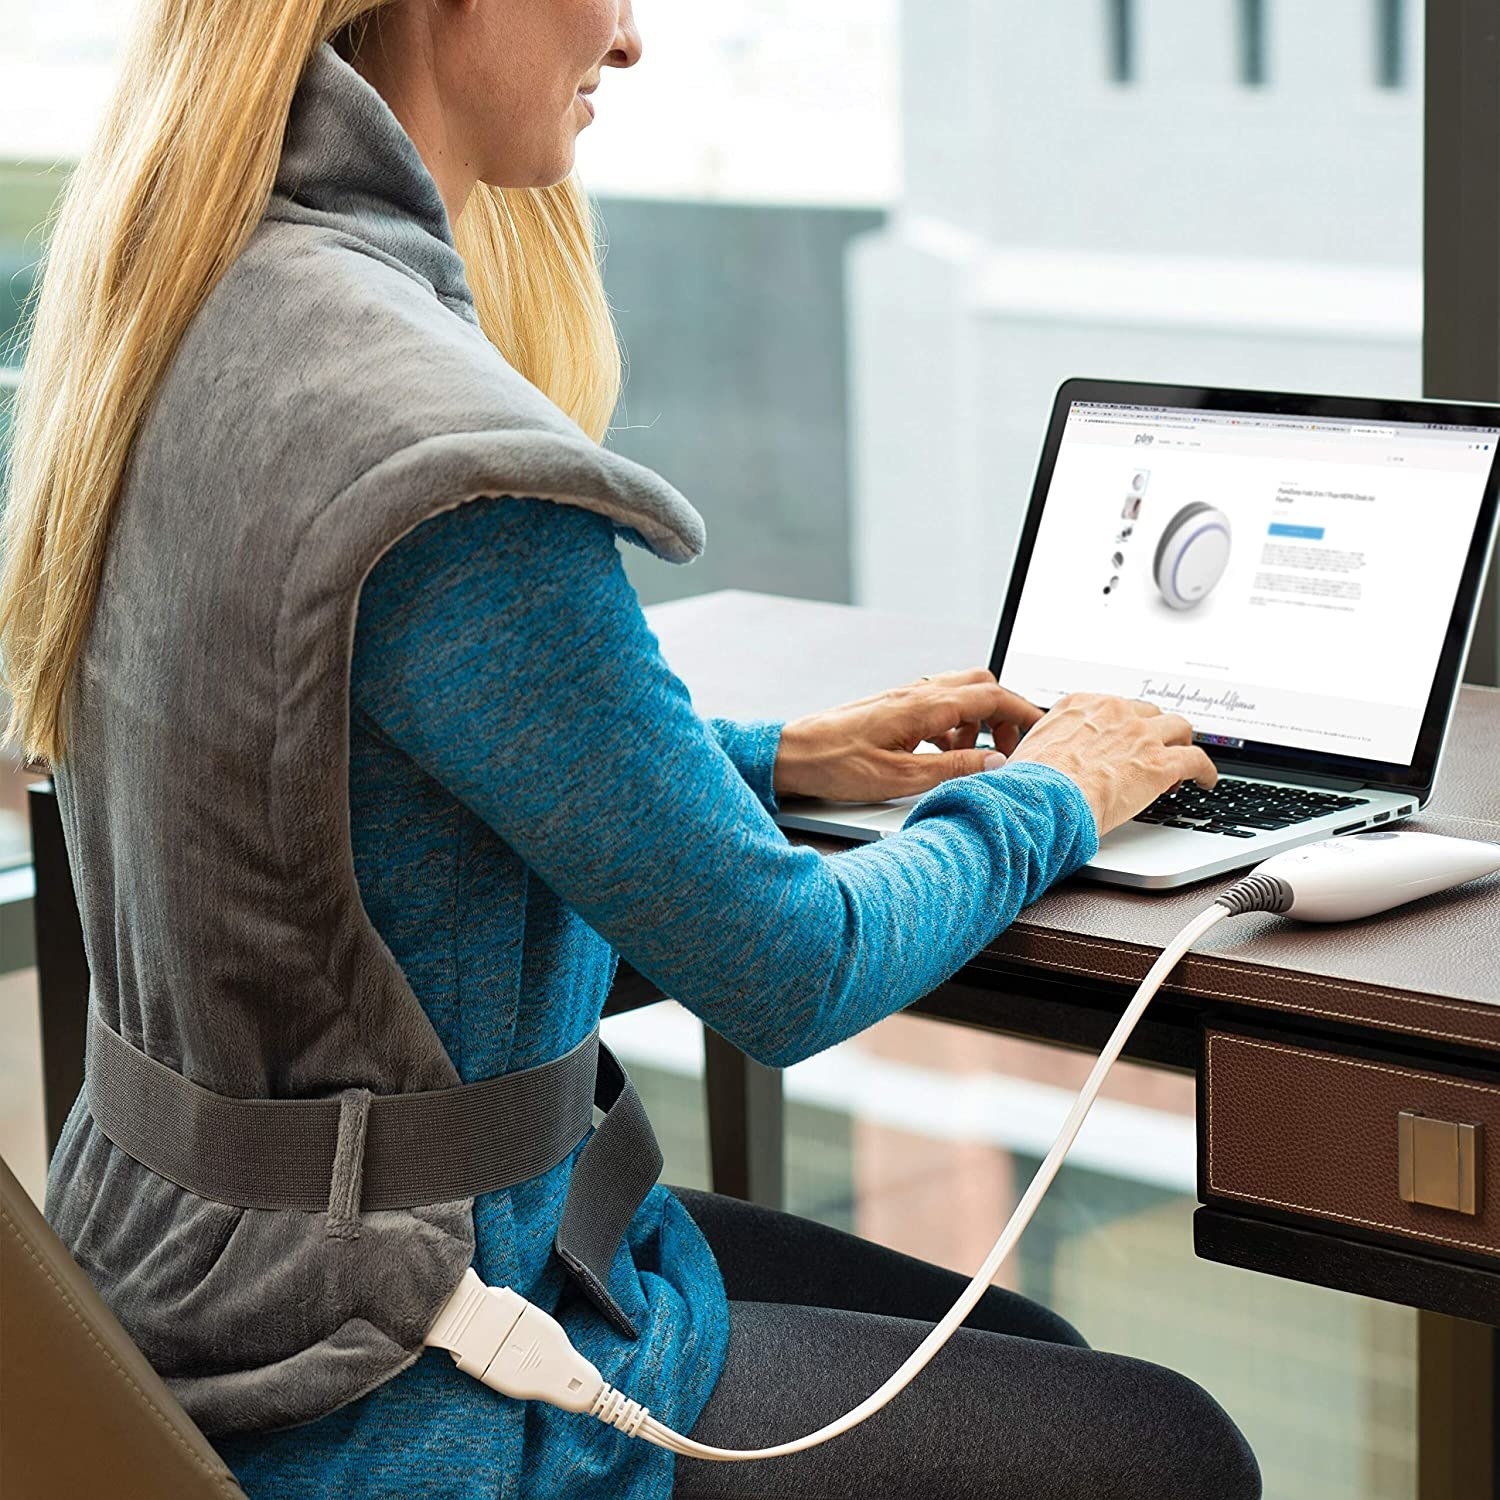 A person wearing the heating pad while working on their computer